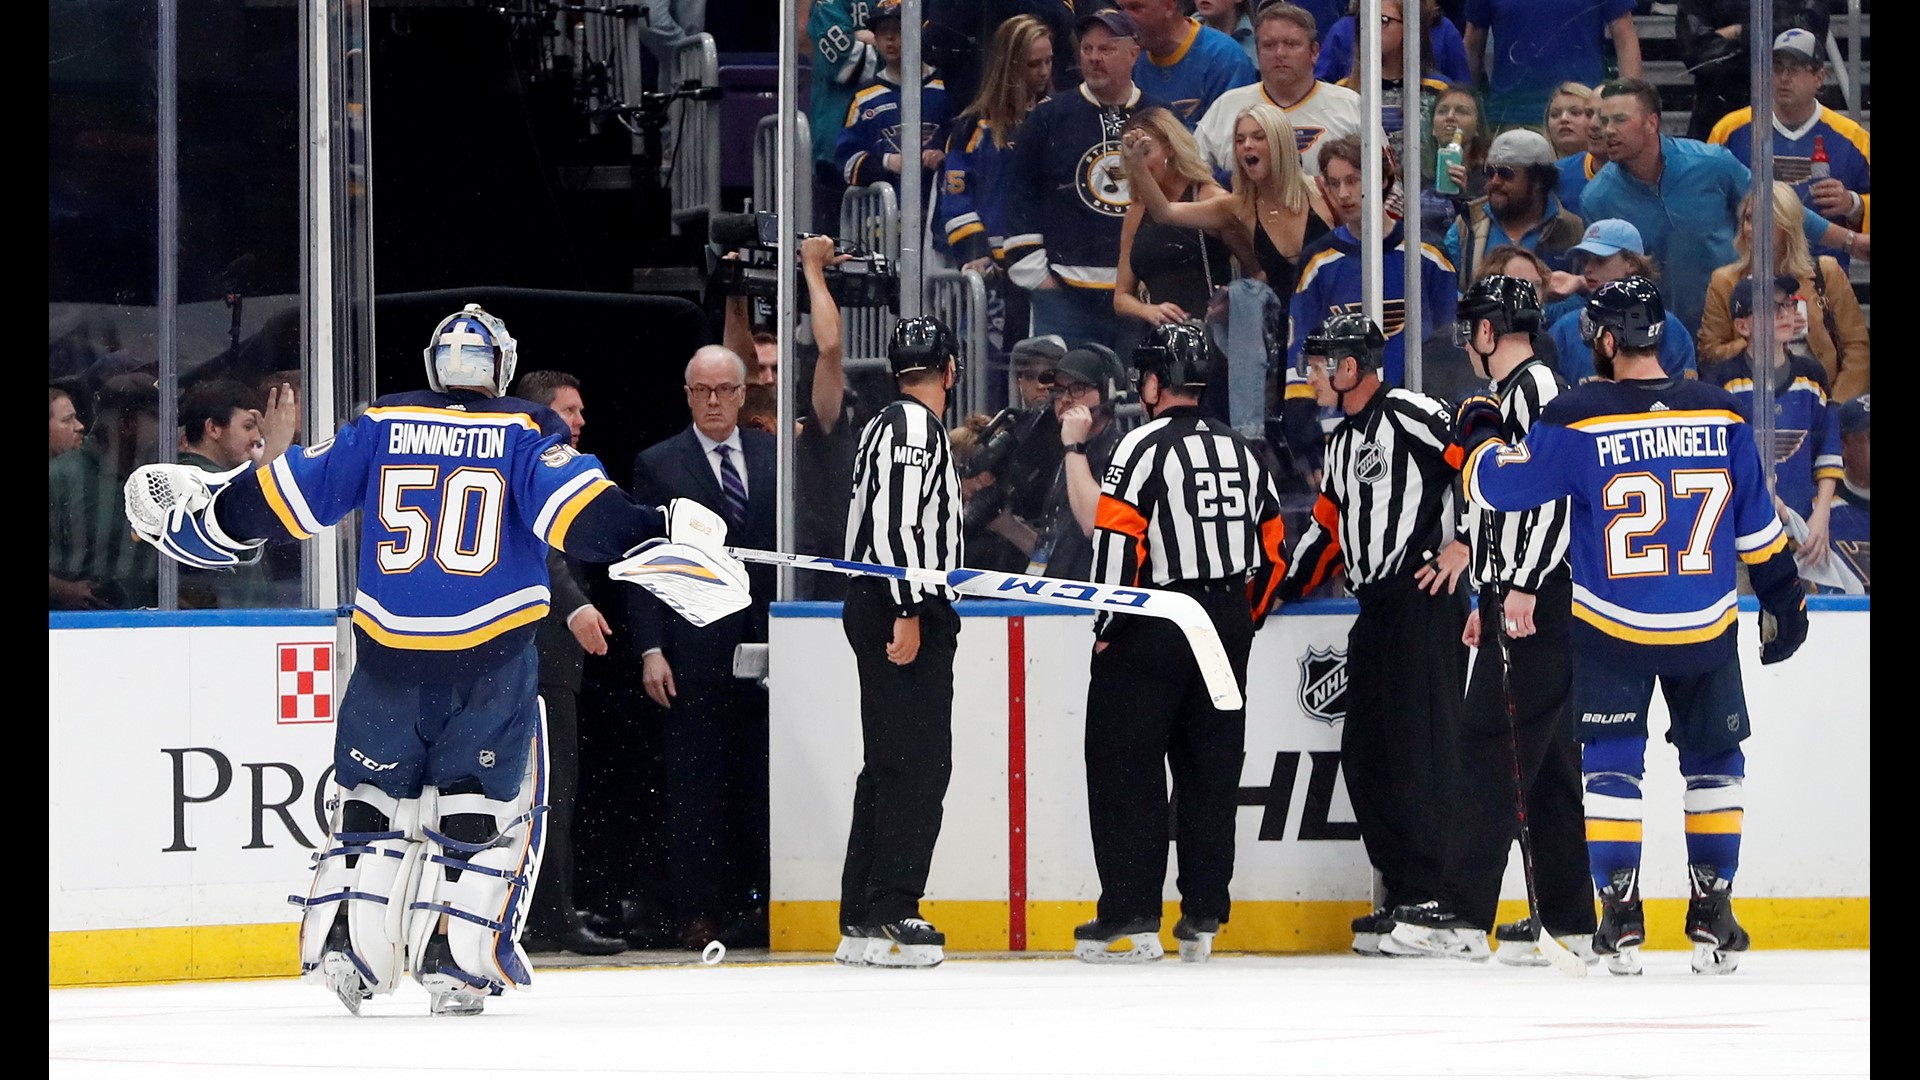 All of St. Louis is still fired up about the non-call in Game 3 of the Western Conference Final.